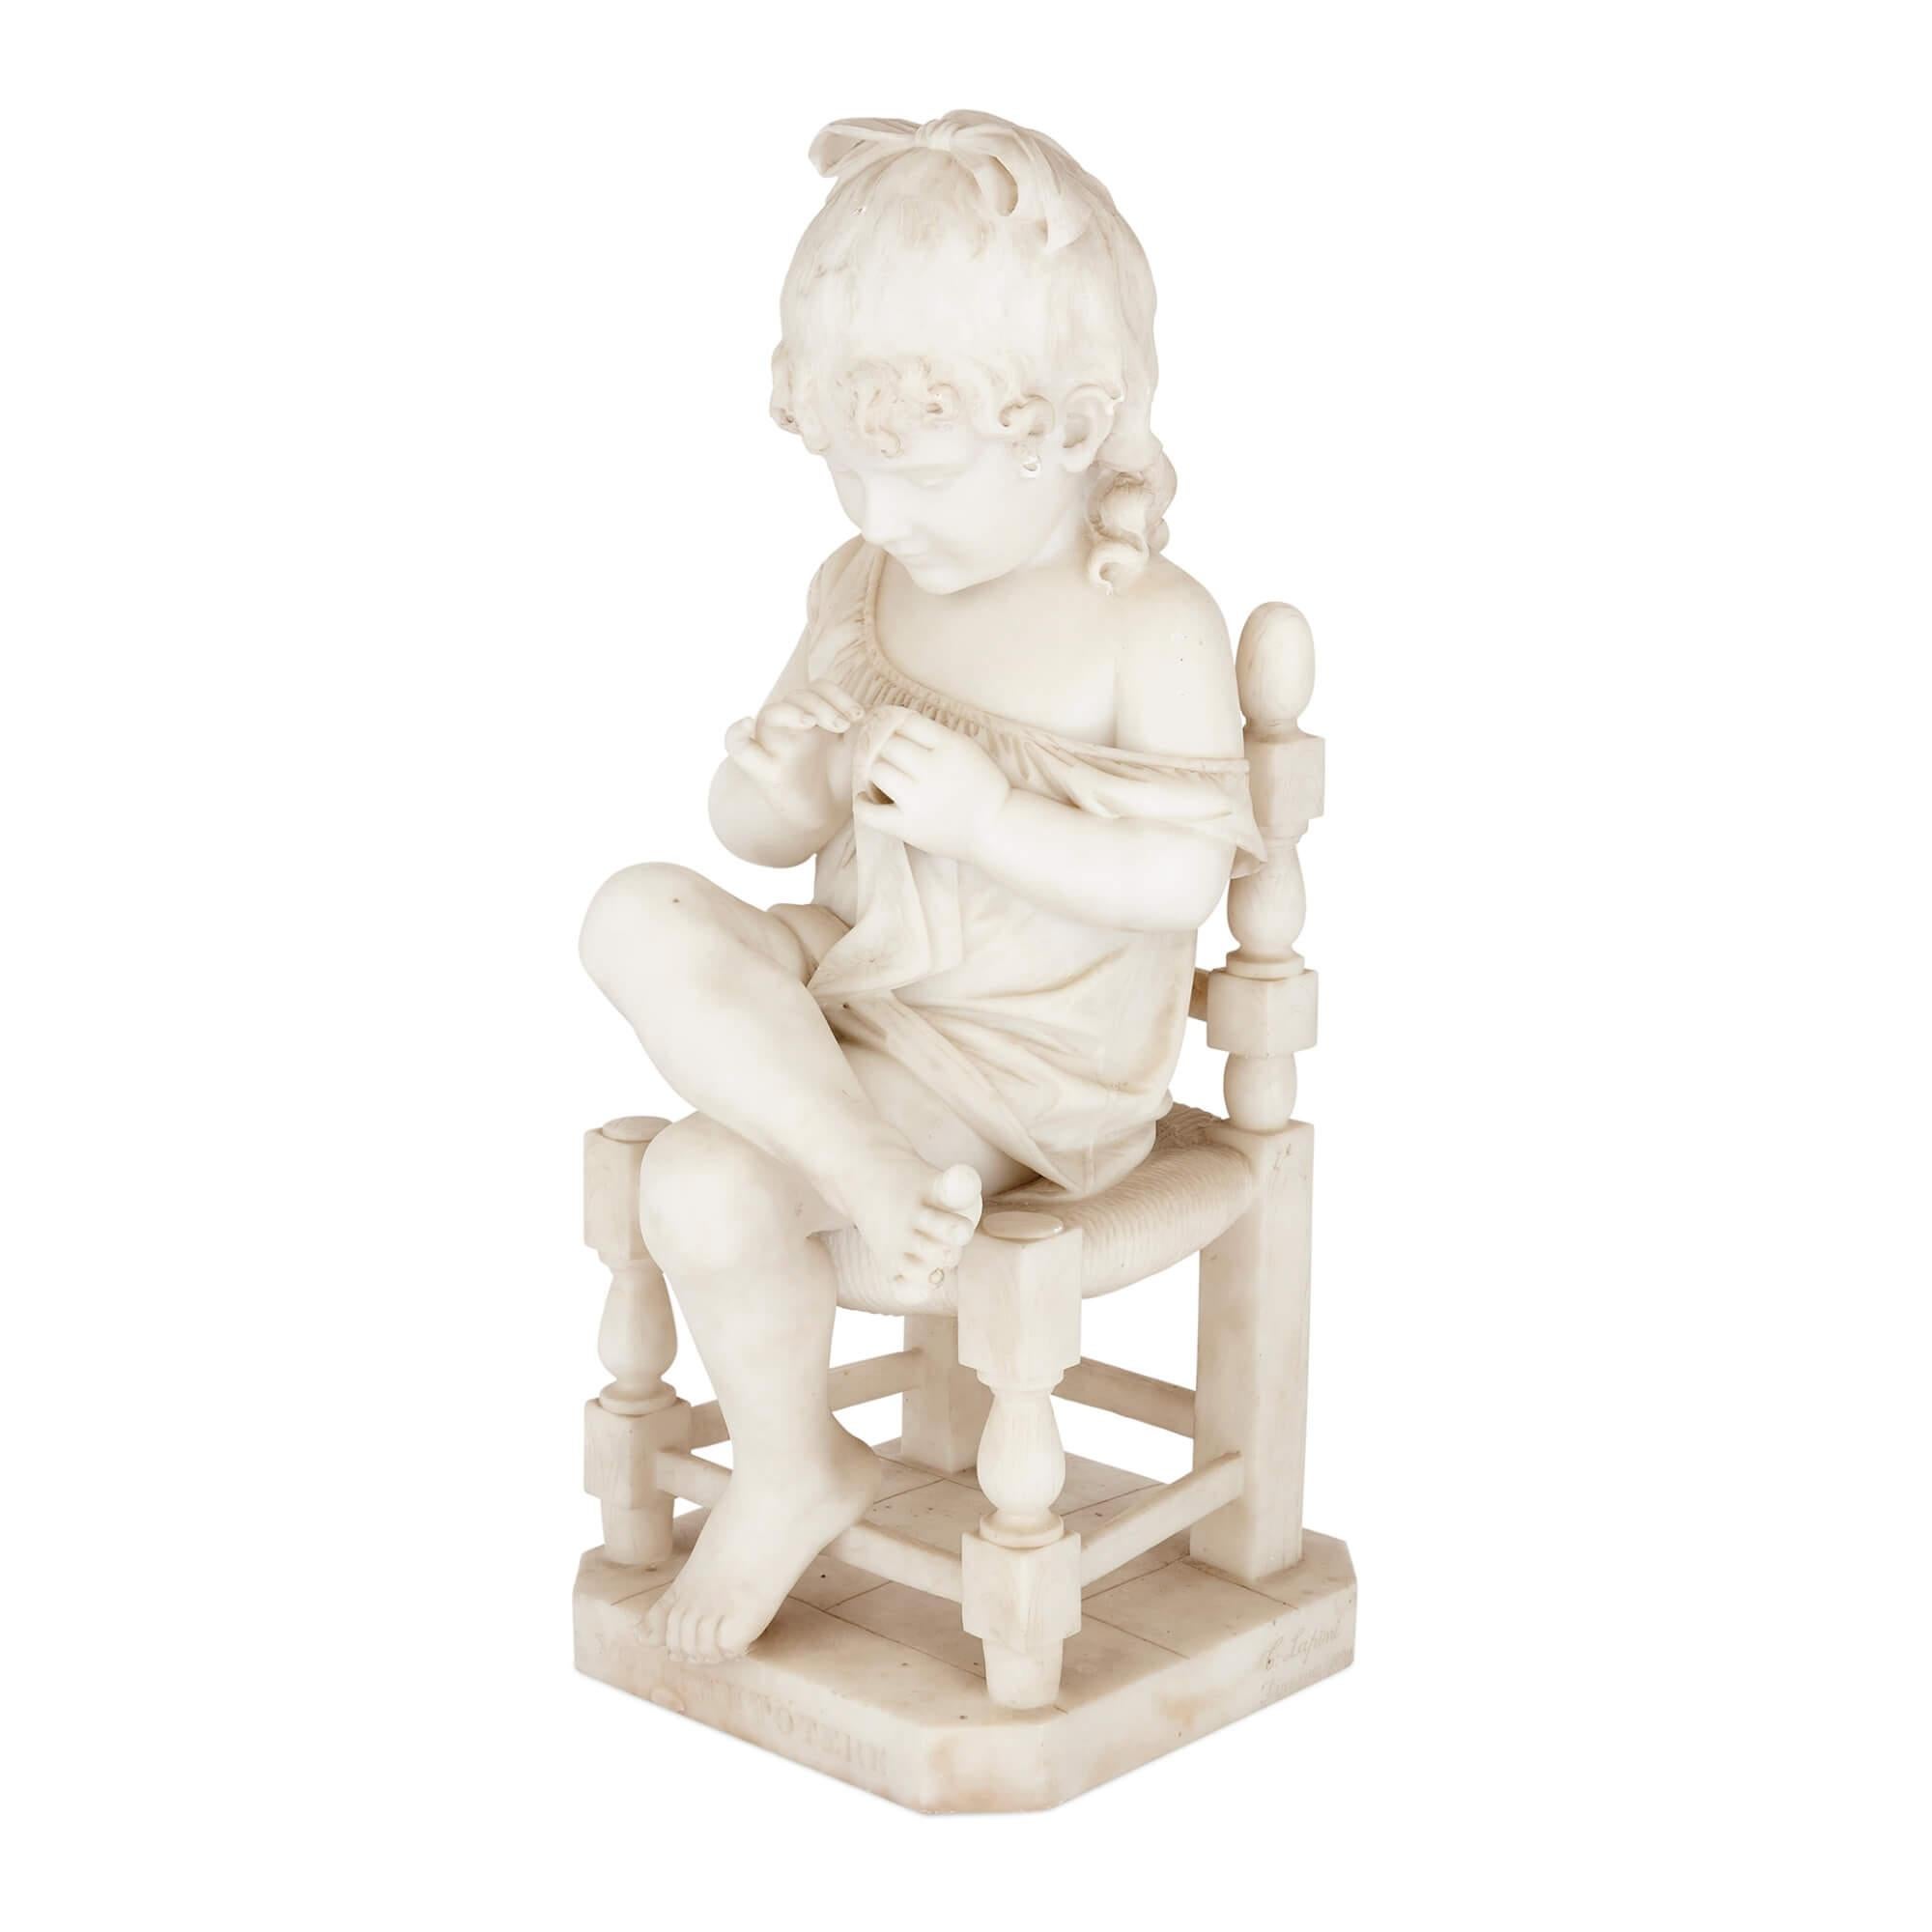 Very rare pair of marble sculptures of seated children by Cesare Lapini
Italian, Late 19th Century
Boy: height 71cm, width 32cm, depth 41cm
Girl: height 71cm, width 33cm, depth 35cm

These wonderful sculptures were executed by the highly